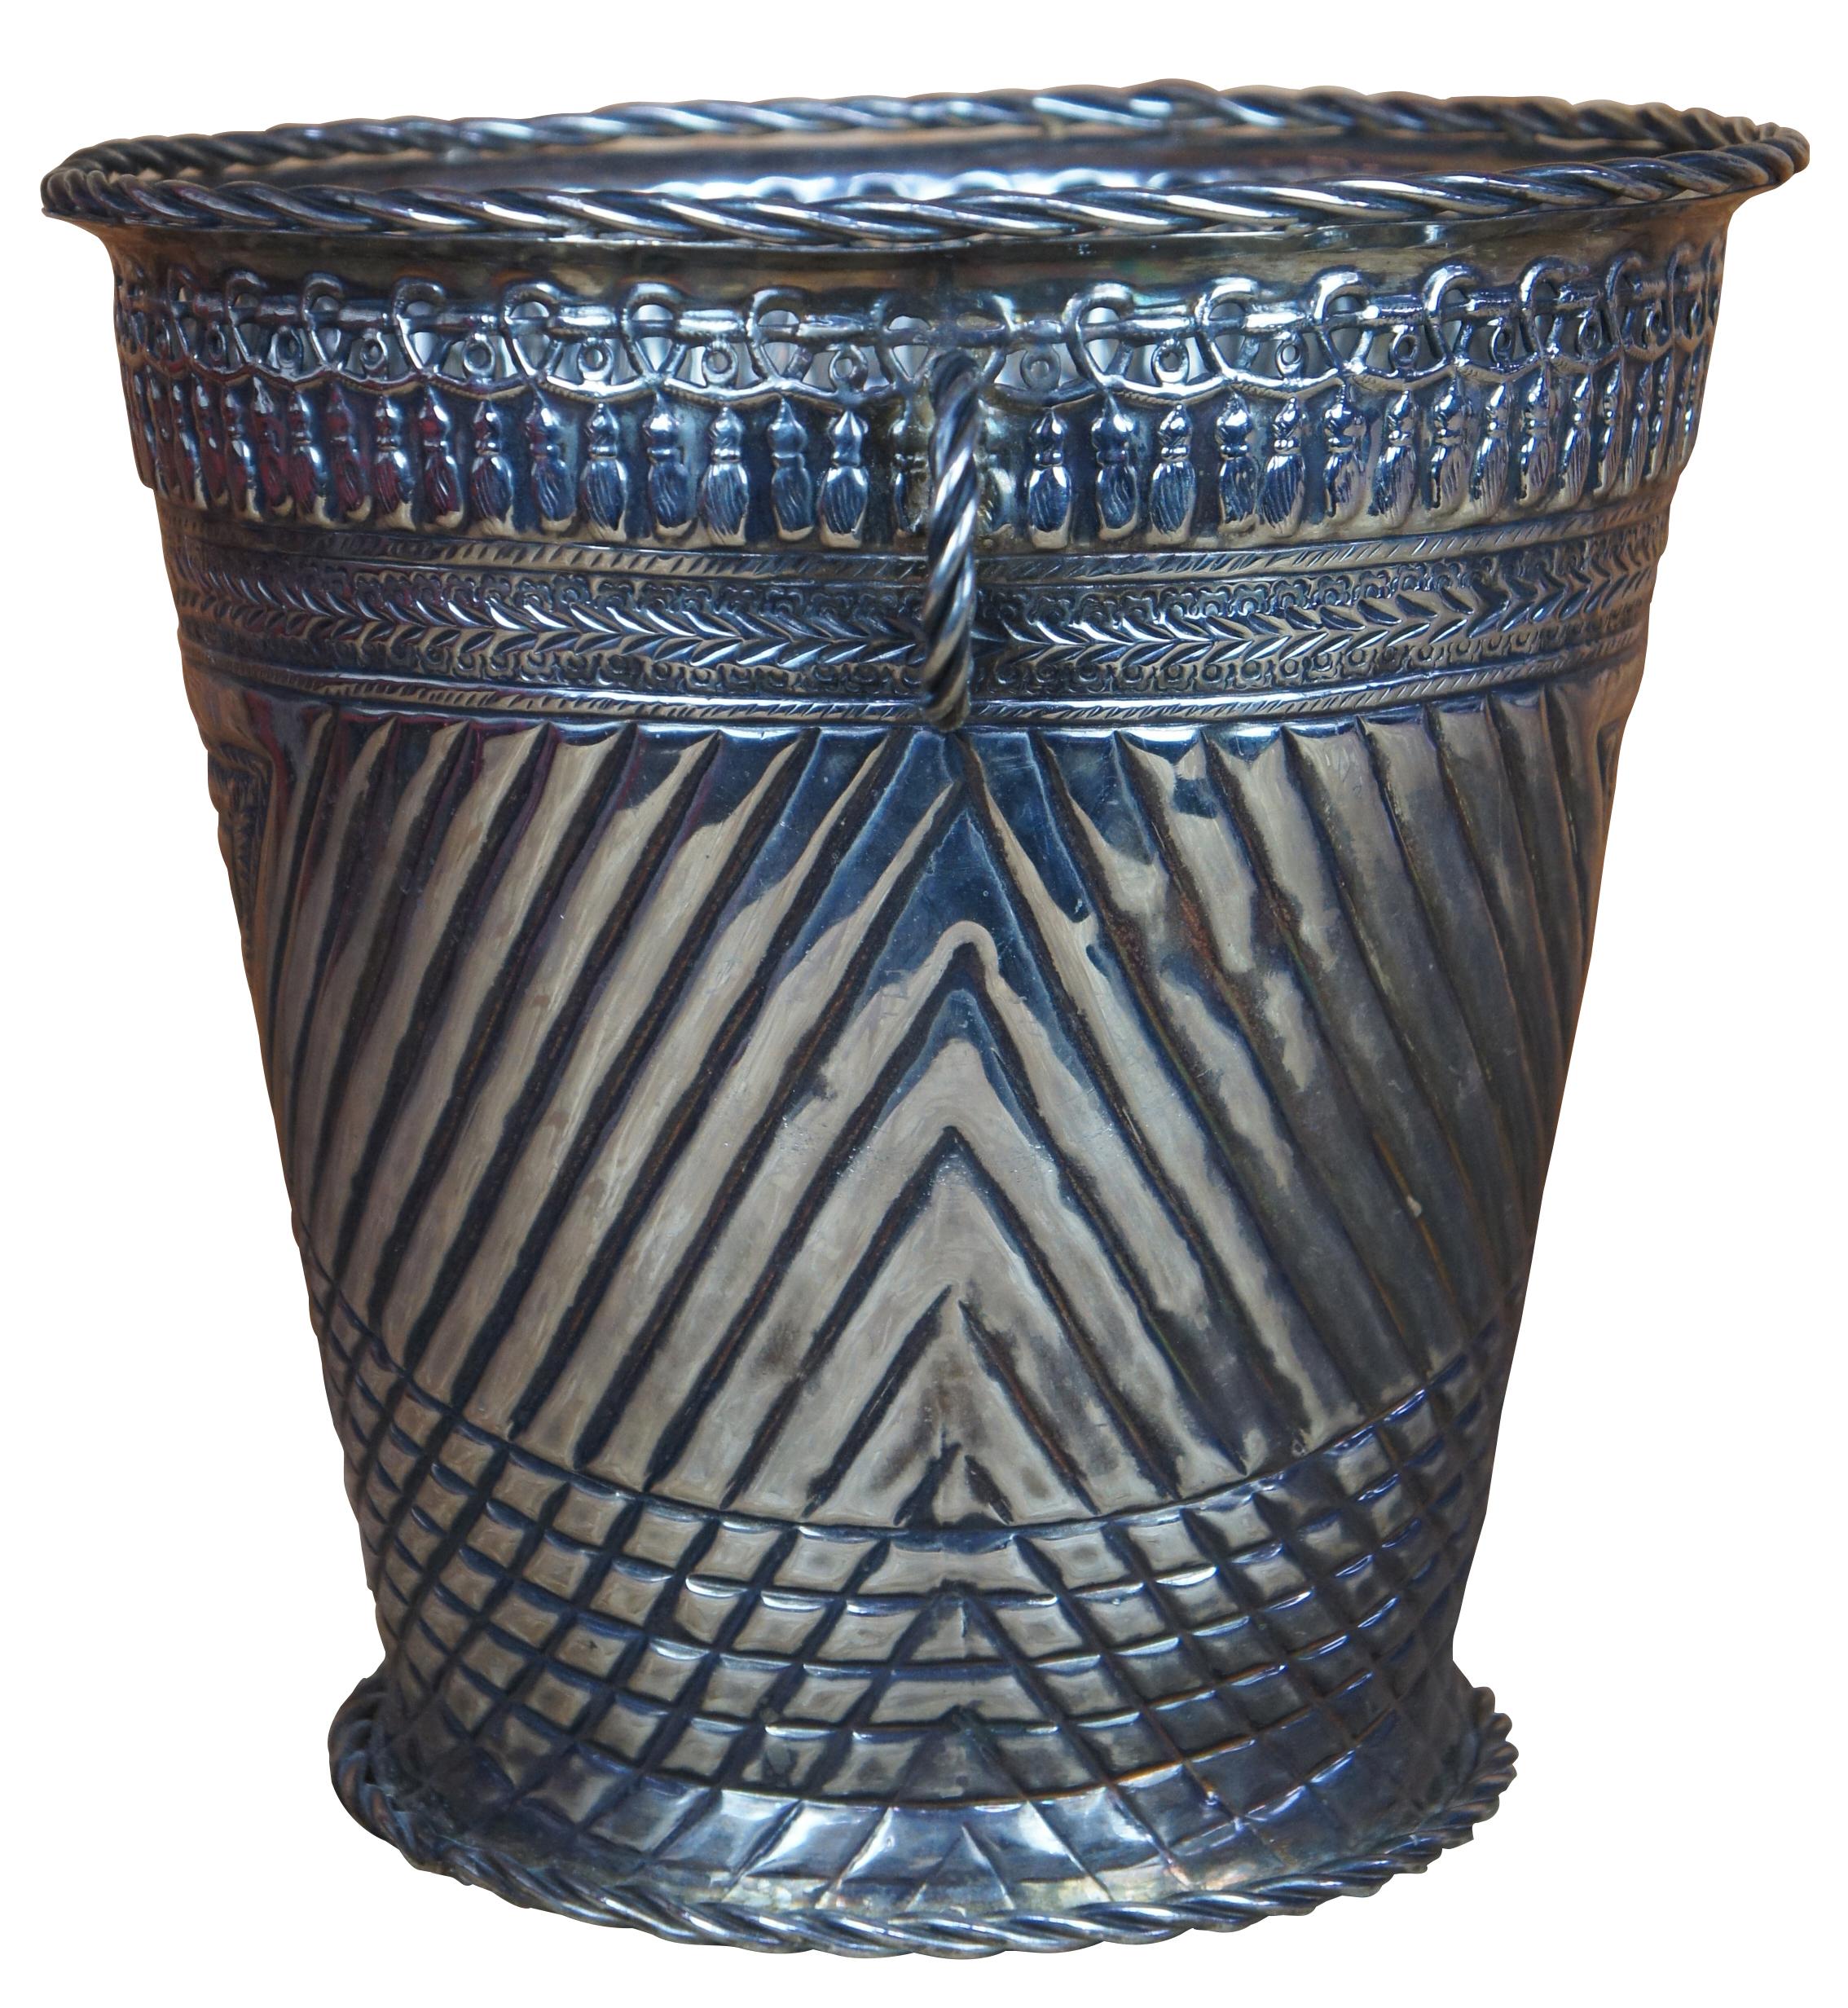 Antique Moroccan silver Hammam bucket featuring hammered, twisted, and reticulated / pierced geometric designs. These buckets were traditionally used for pouring water in Moroccan Hammam baths. Each bucket has traditional Moroccan patterns hammered